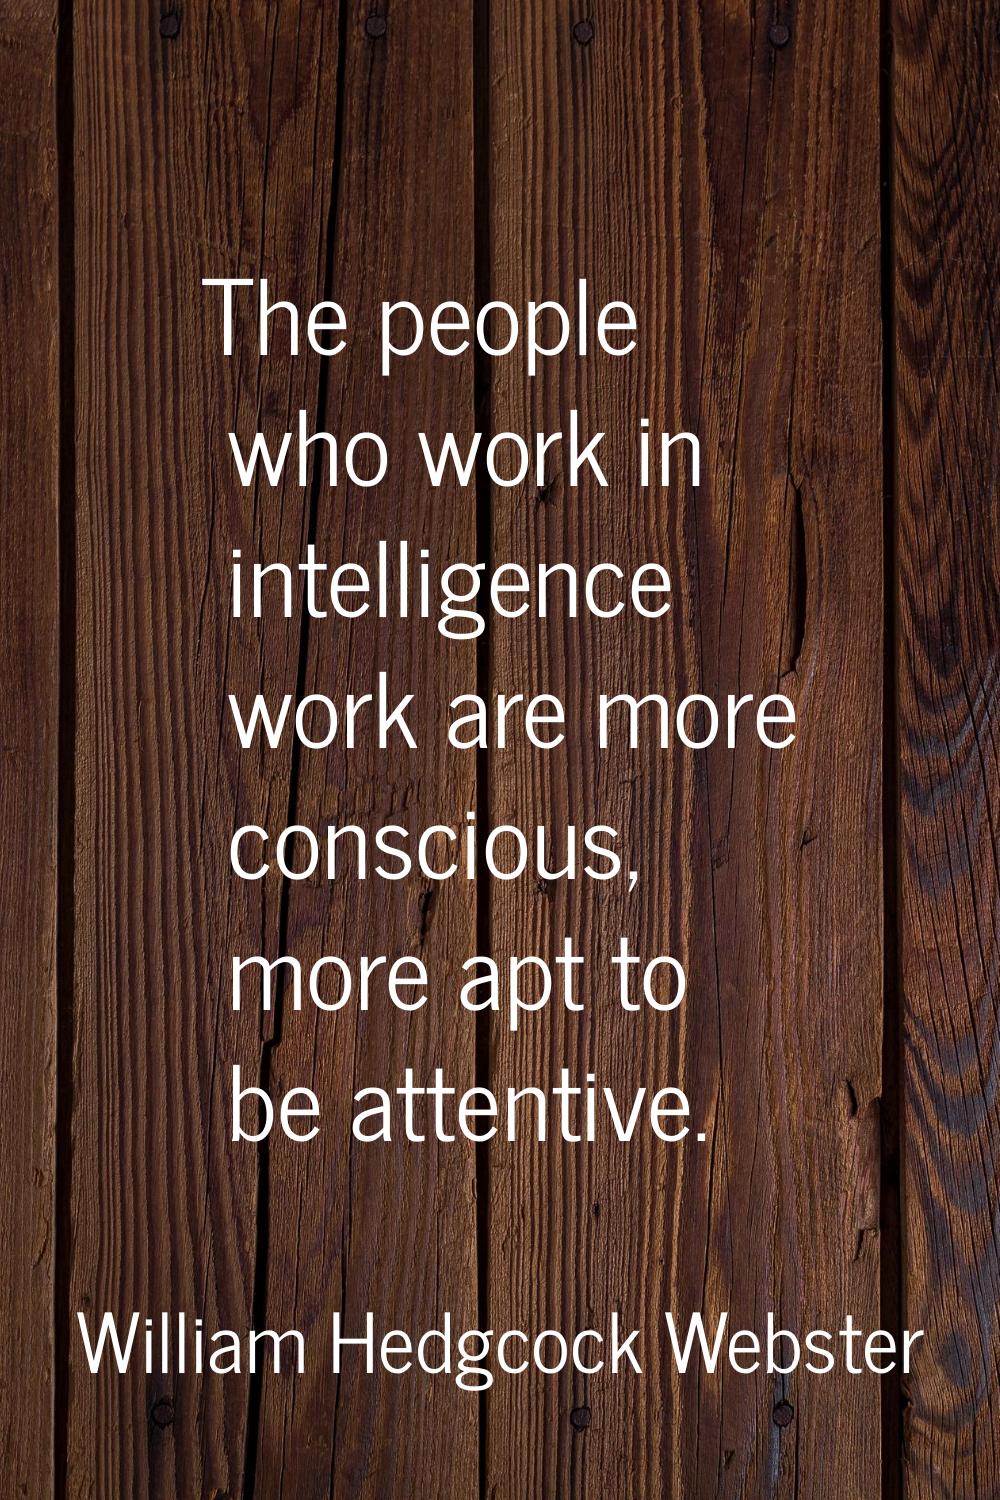 The people who work in intelligence work are more conscious, more apt to be attentive.